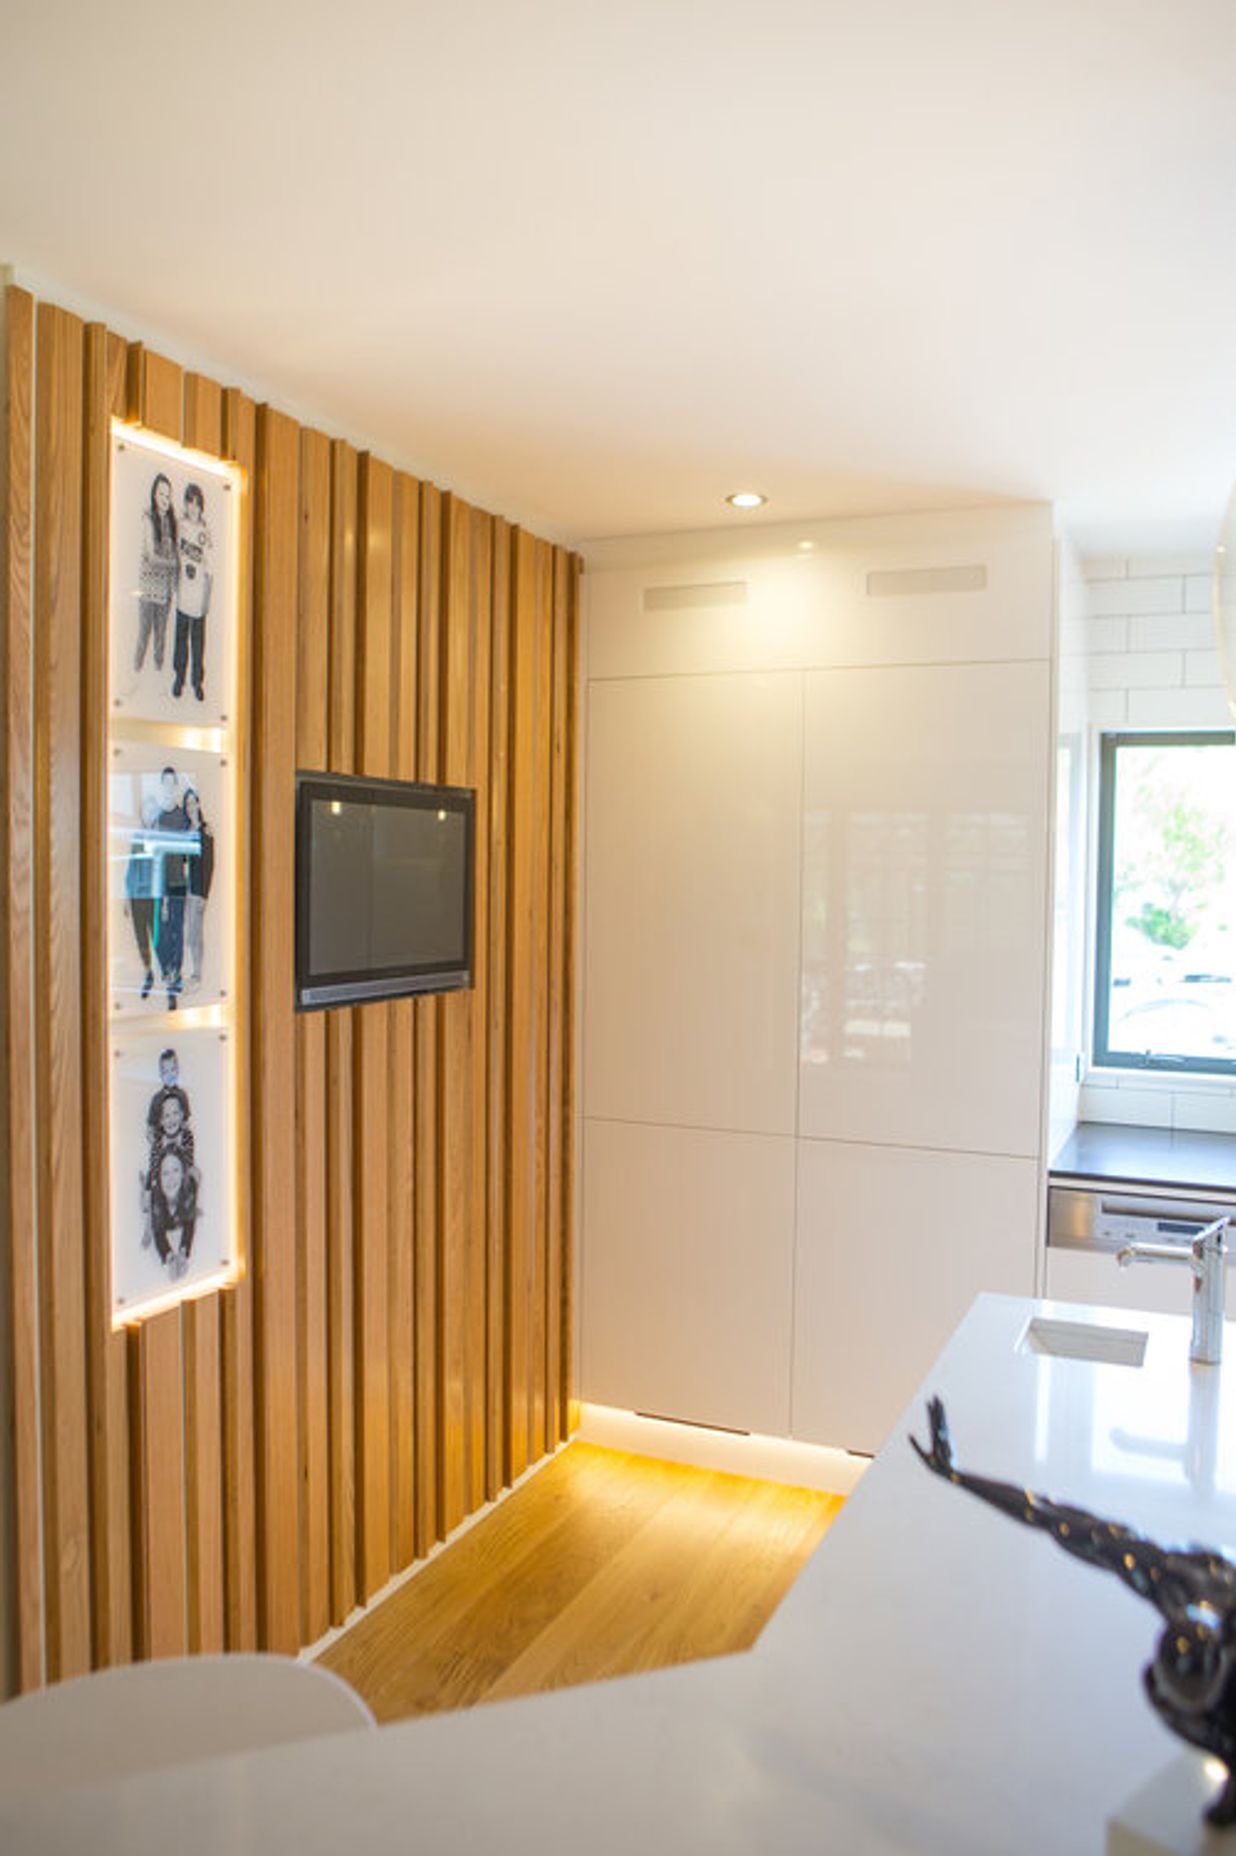 This was a unique response to the client’s brief - an oak plywood slatted divider wall, which brings the family’s personality to the space through an inset touch screen computer and digital photo frames.